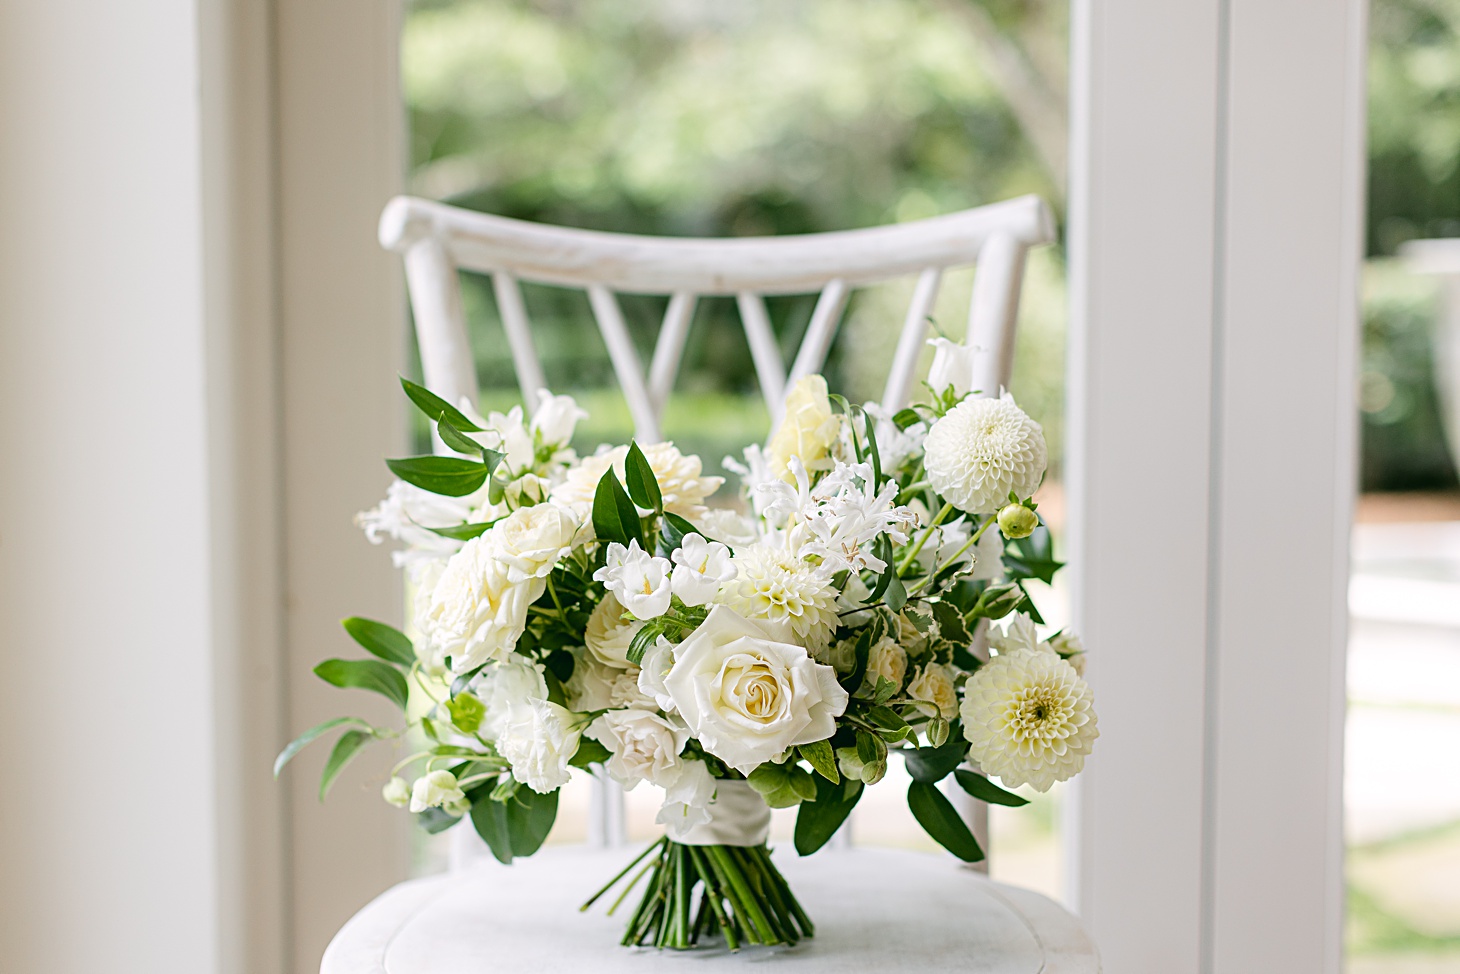 Organic soft white brides bouquet by Kate Asire at Old Edwards Inn wedding by Sarah Bradshaw Photography